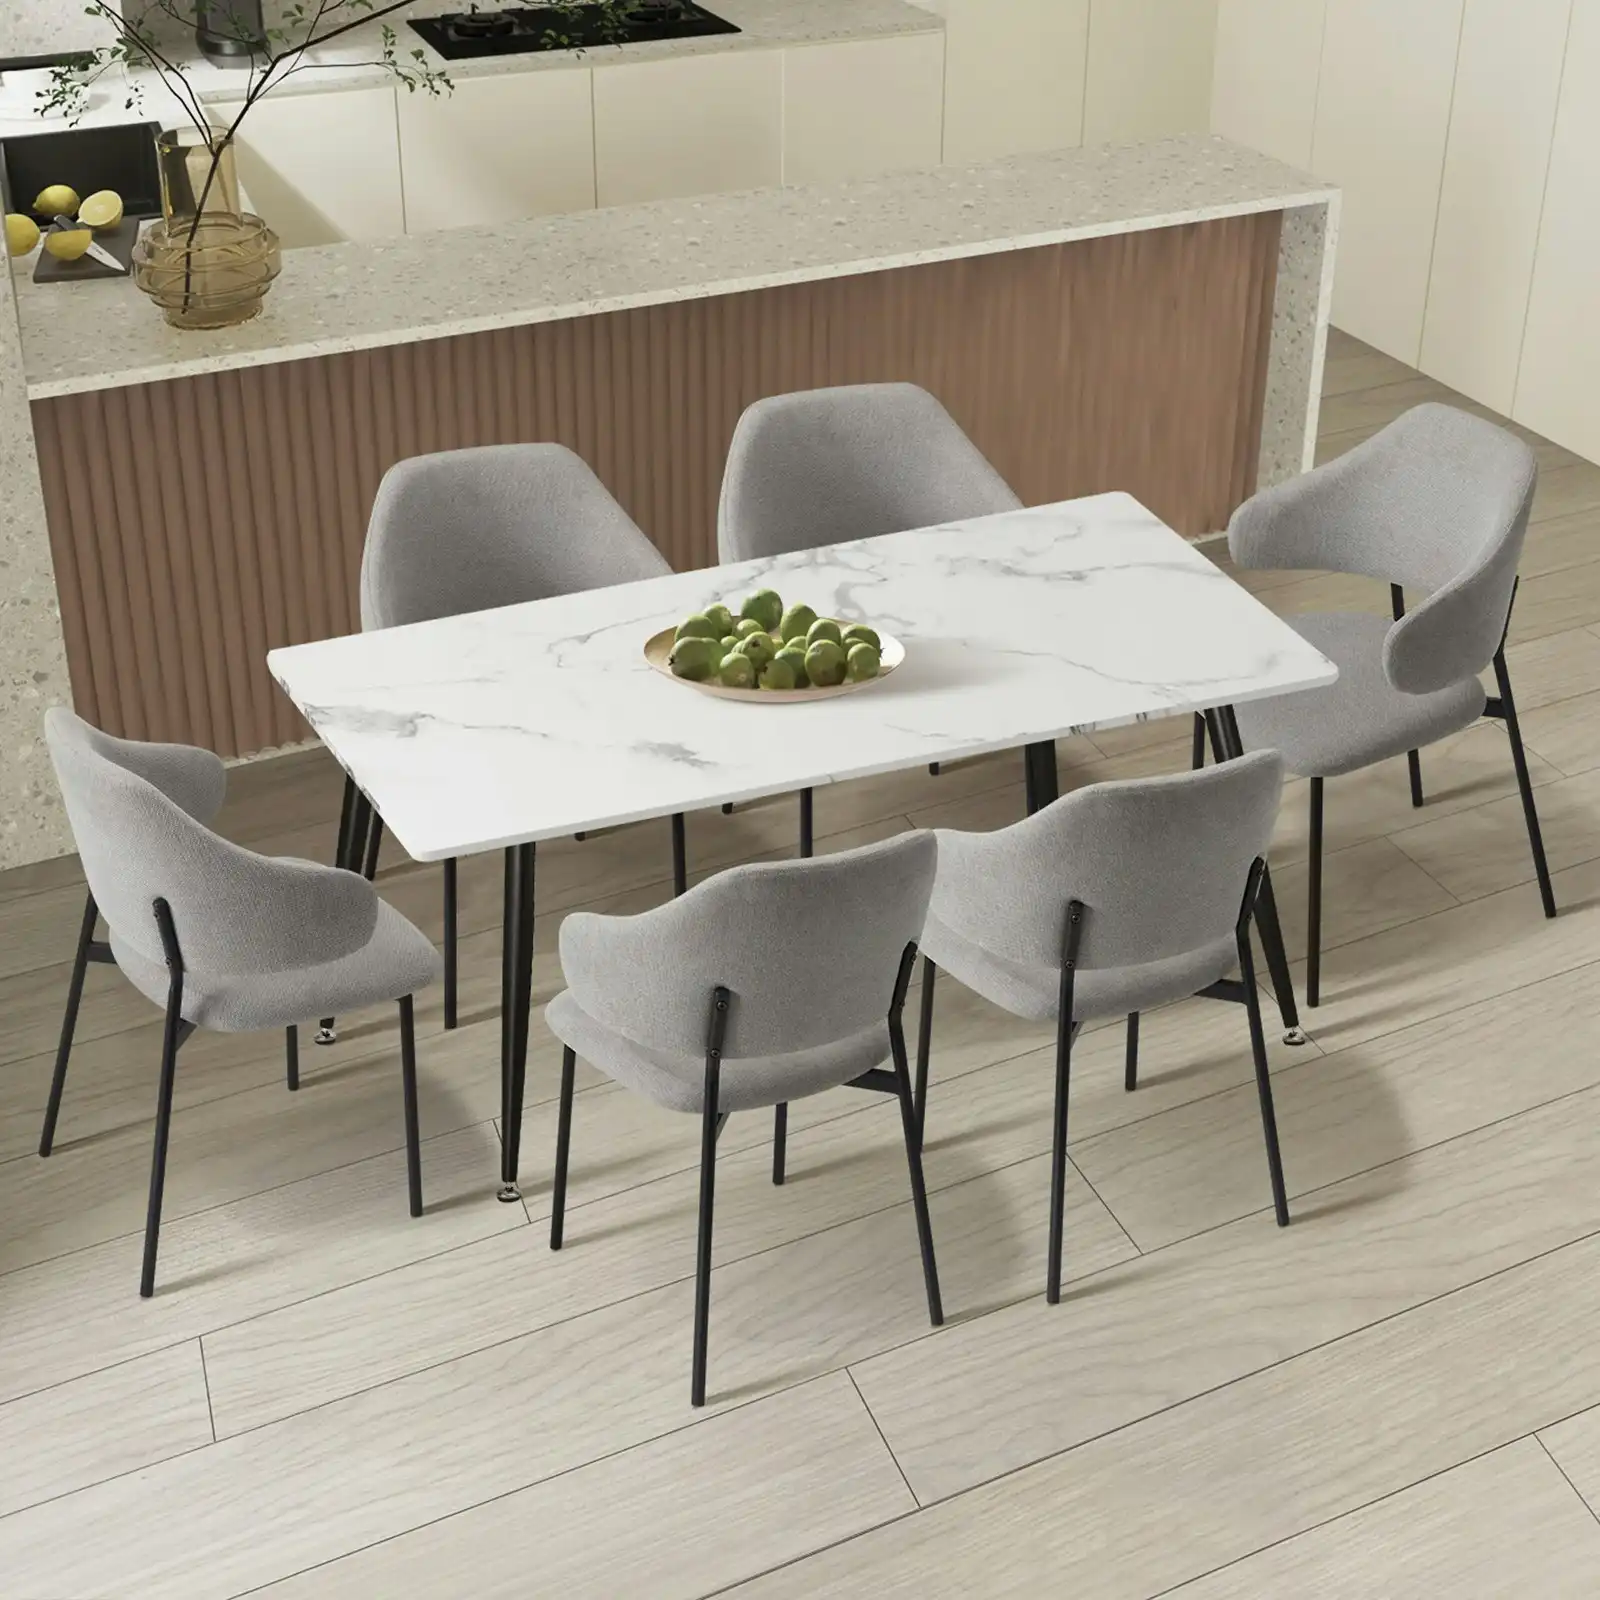 Oikiture 7PCS Dining sets 120cm Rectangle Table with 6PCS Chairs Fabric Grey